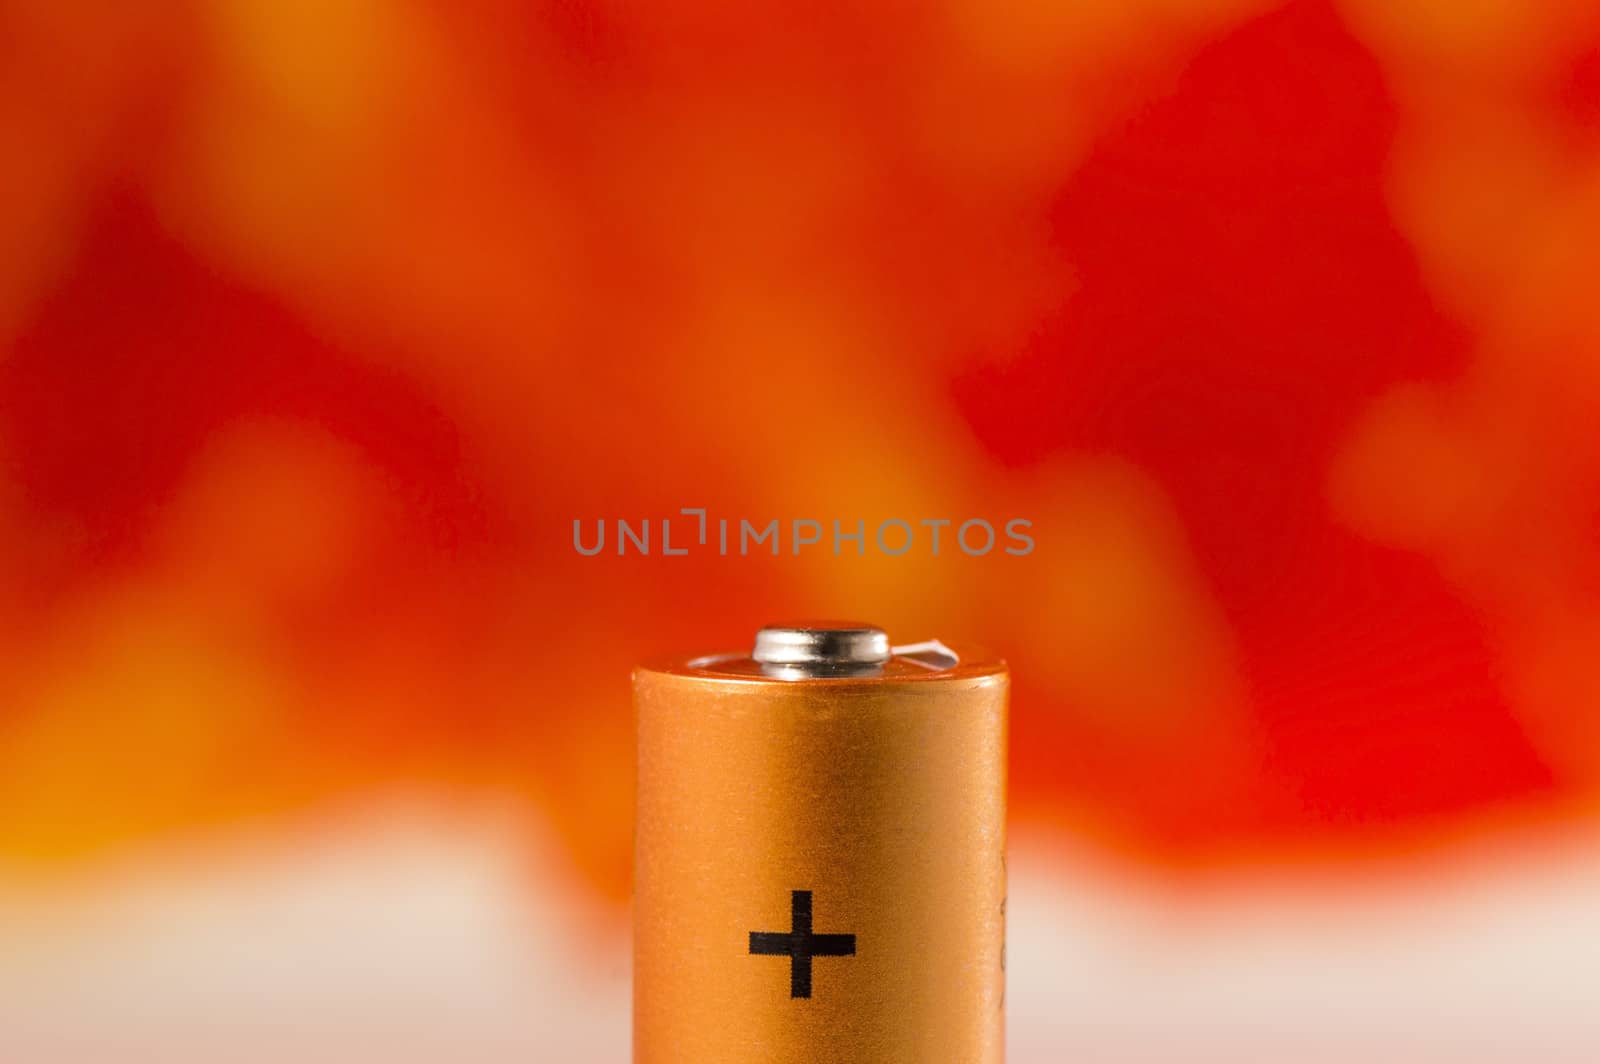 Detail of a battery with plus sign on orange background